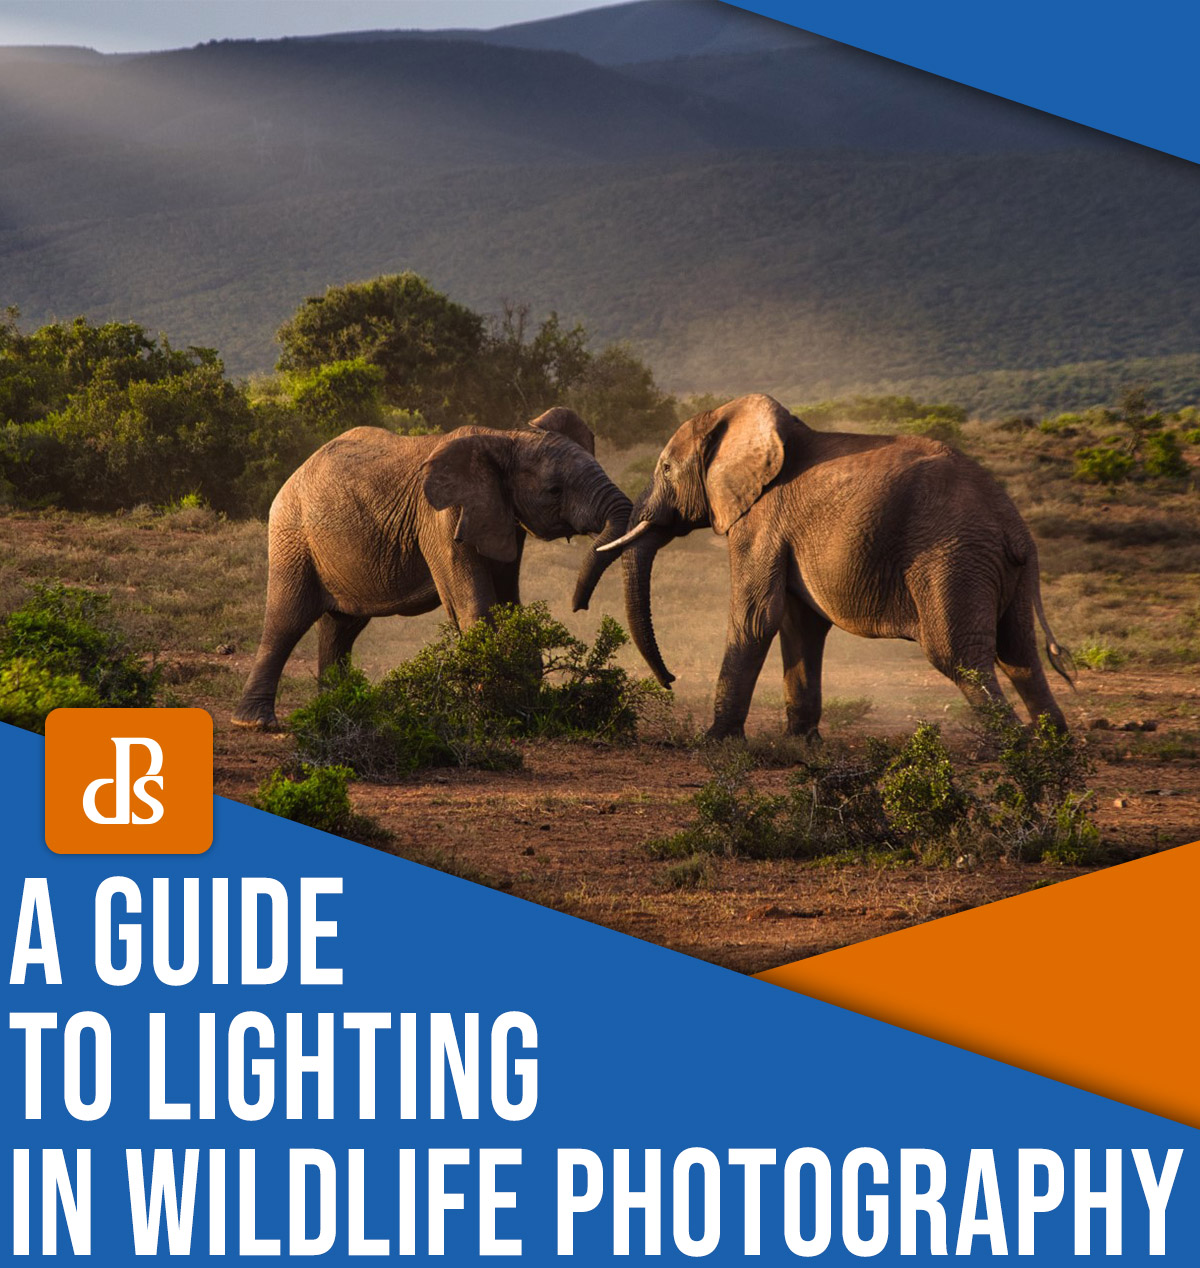 A guide to lighting in wildlife photography